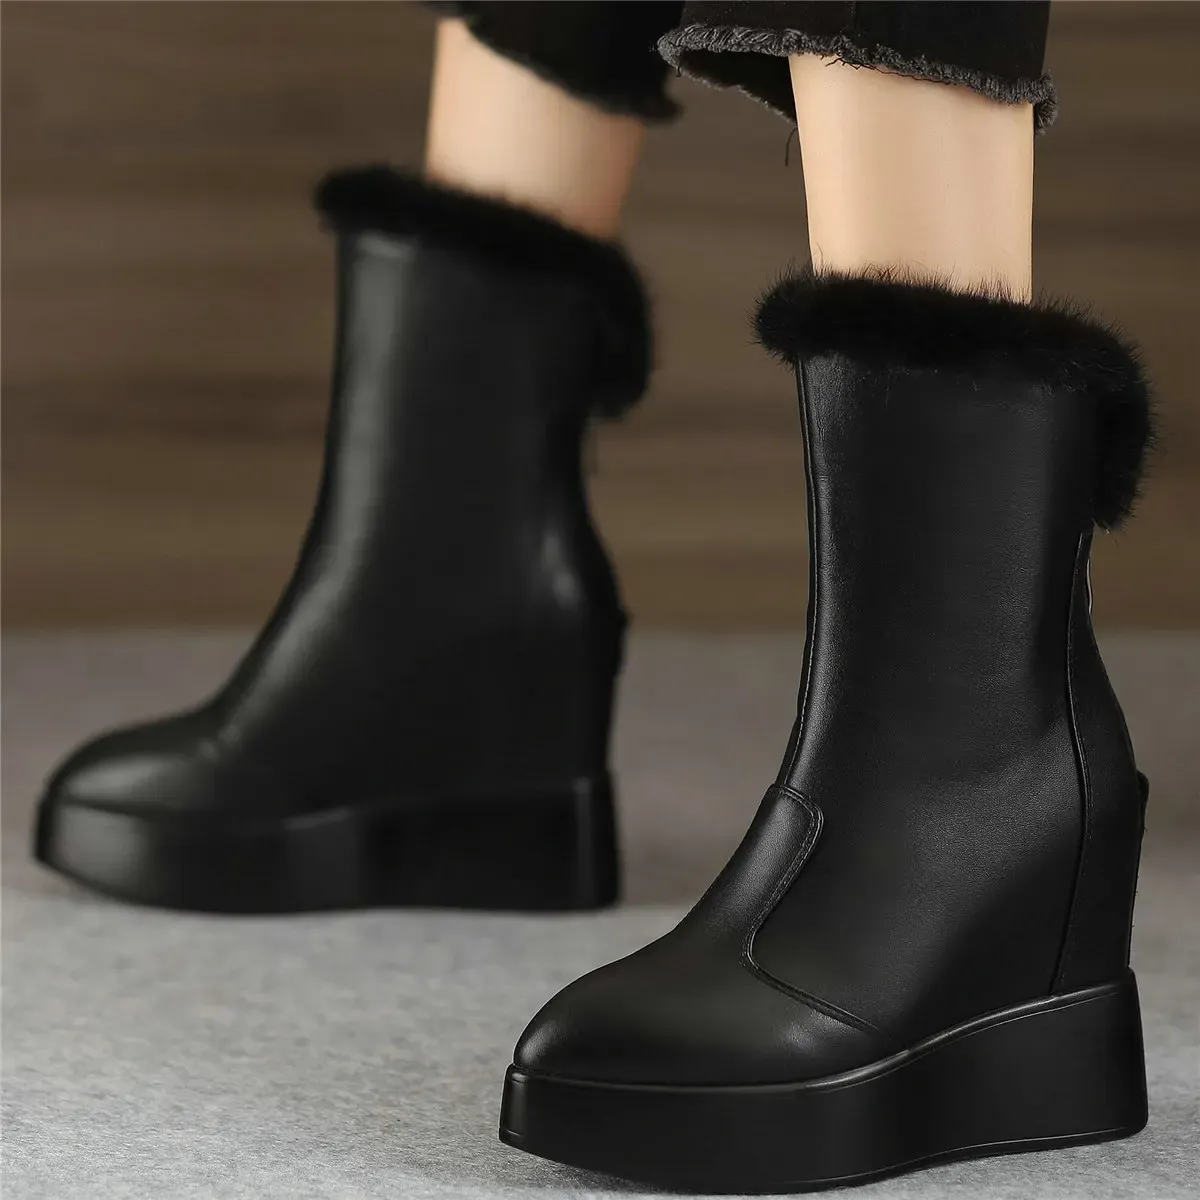 Boots Warm Fur Platform Pumps Women Genuine Leather Wedges High Heel Motorcycle Boots Female Pointed Toe Fashion Sneakers Casual Shoes